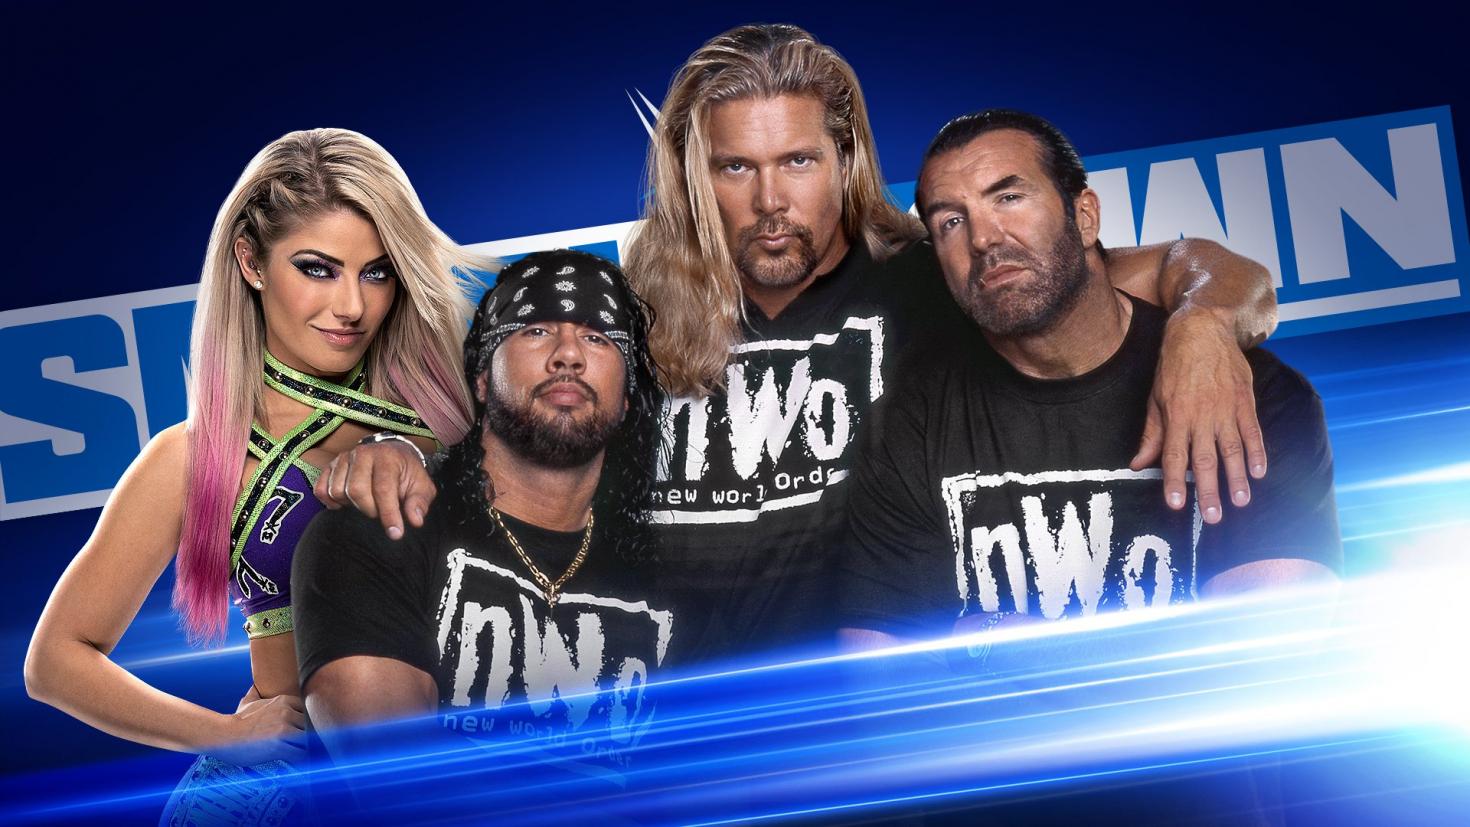 WWE SmackDown Results Mar 6 2020 NWo Tag Team Gauntlet Match TPWW